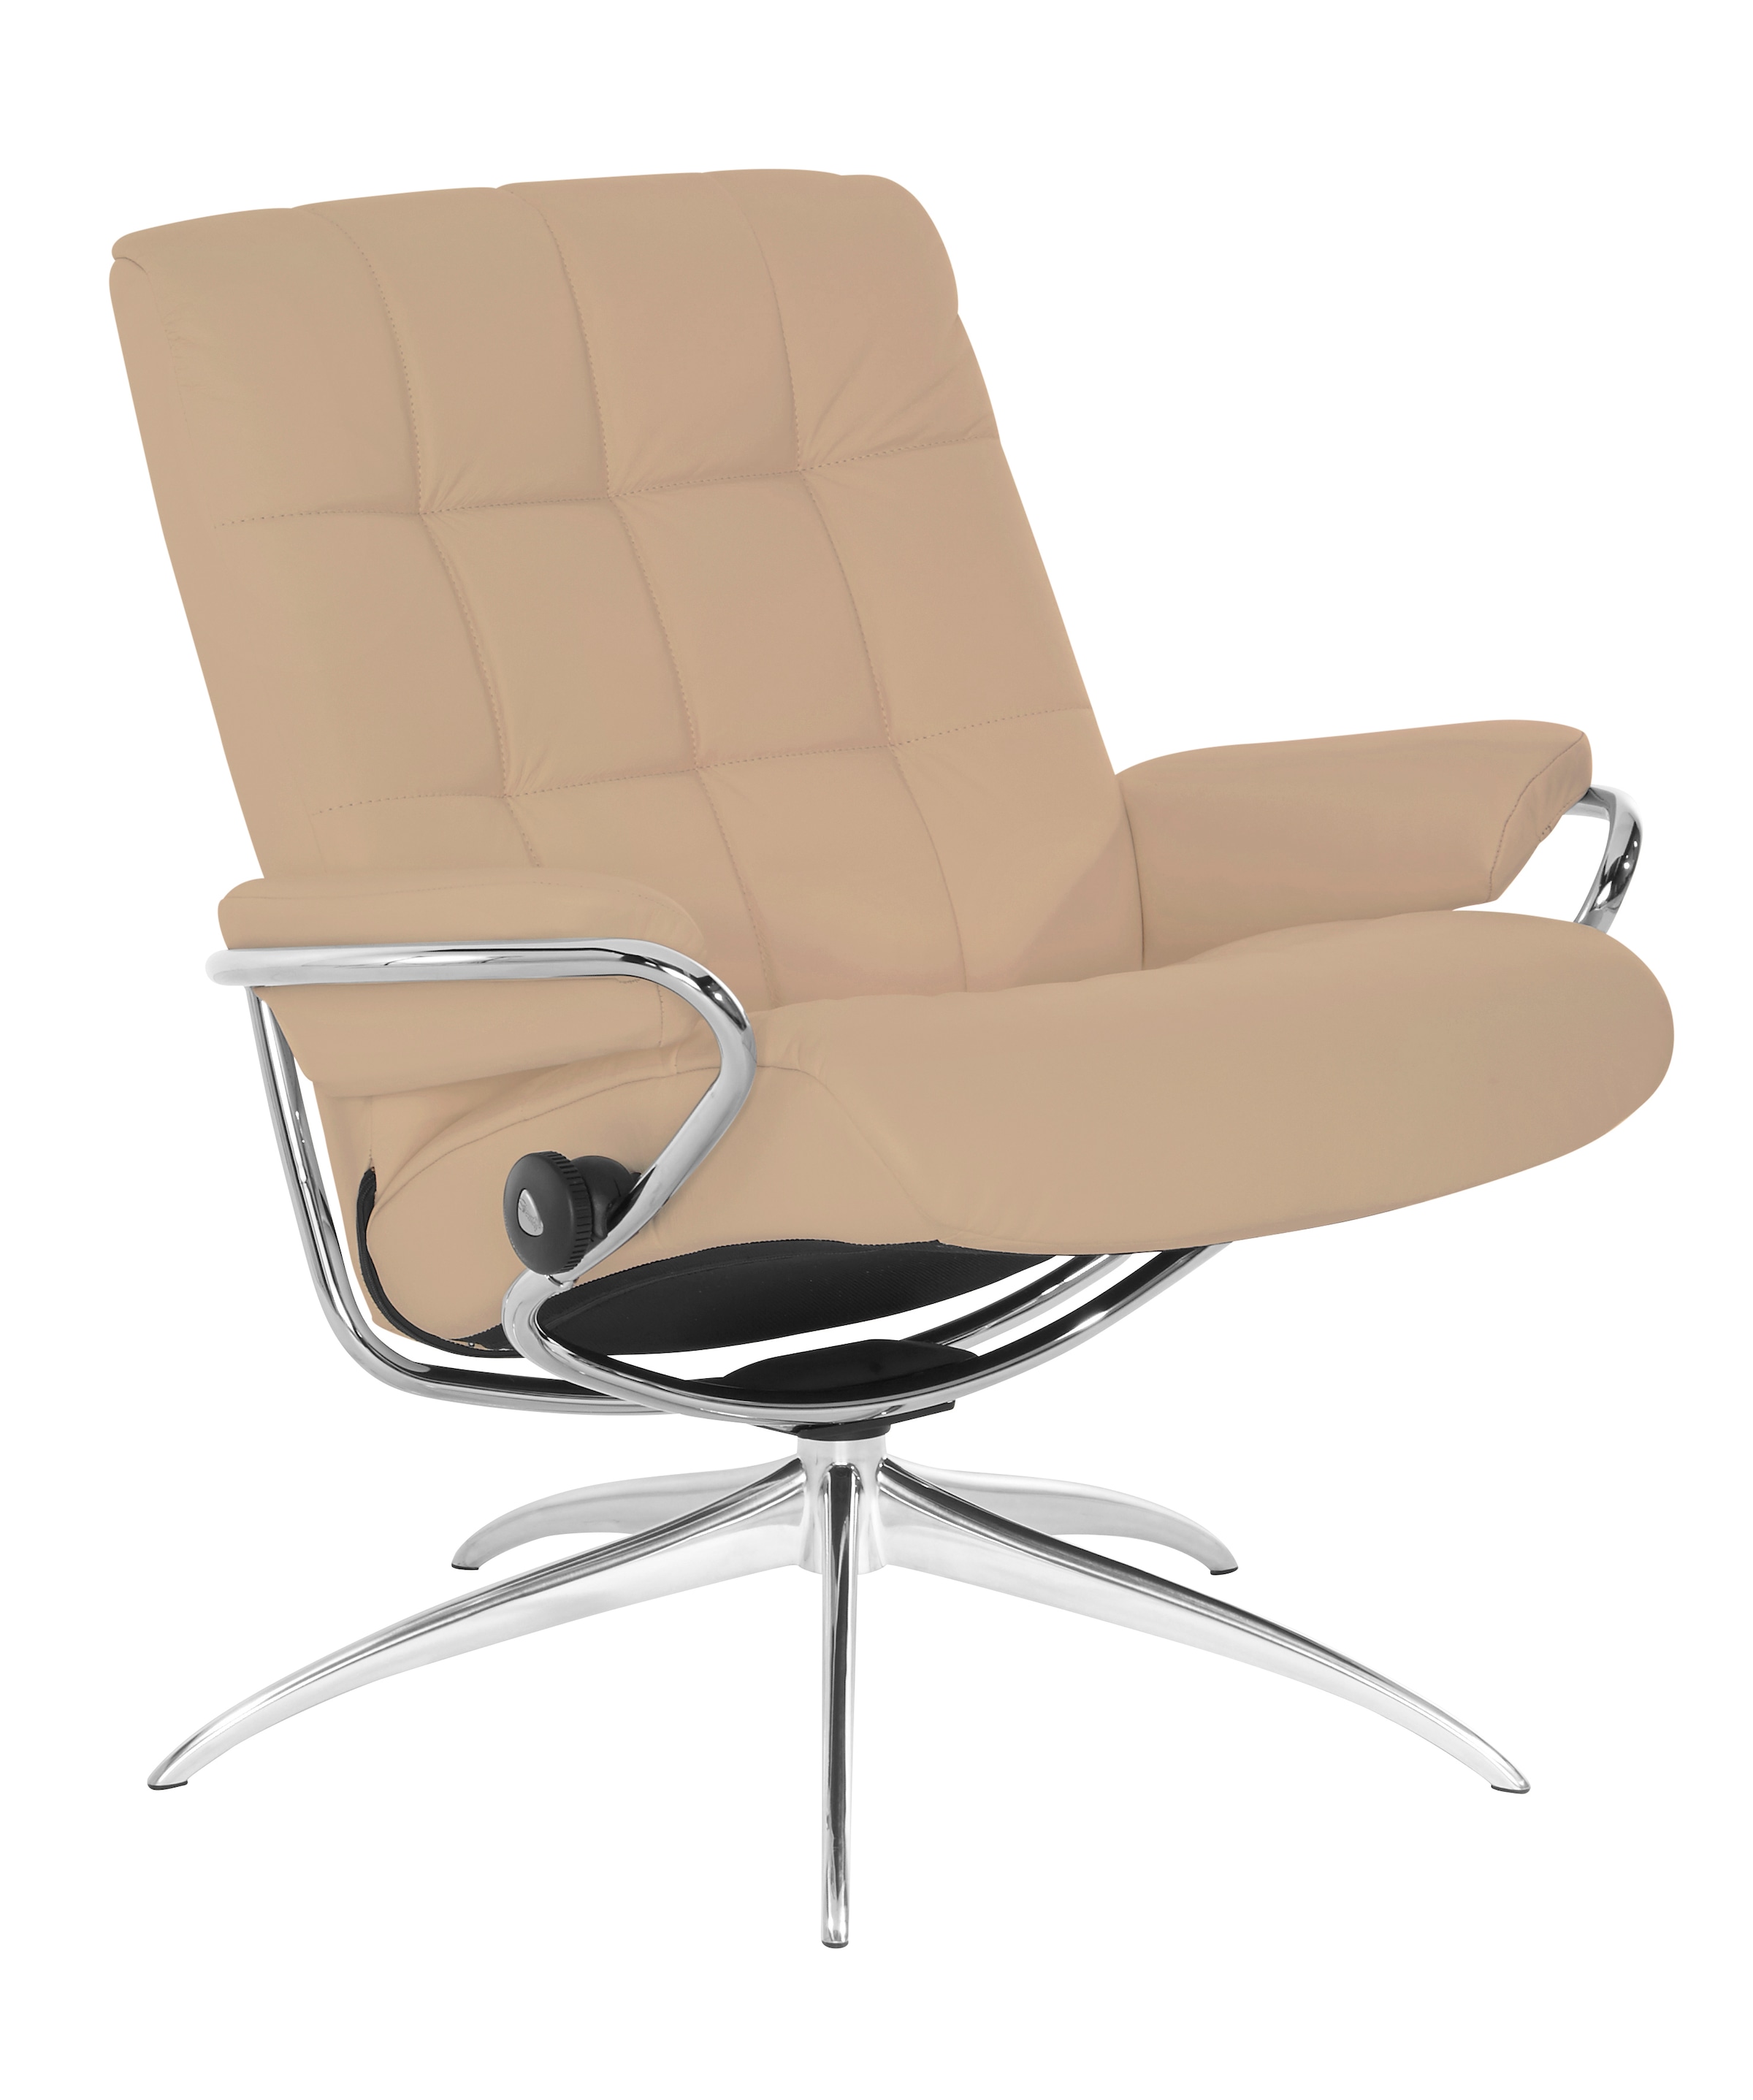 Stressless® Relaxsessel »London«, Low Back, mit Star Base, Gestell Chrom  kaufen bei OTTO